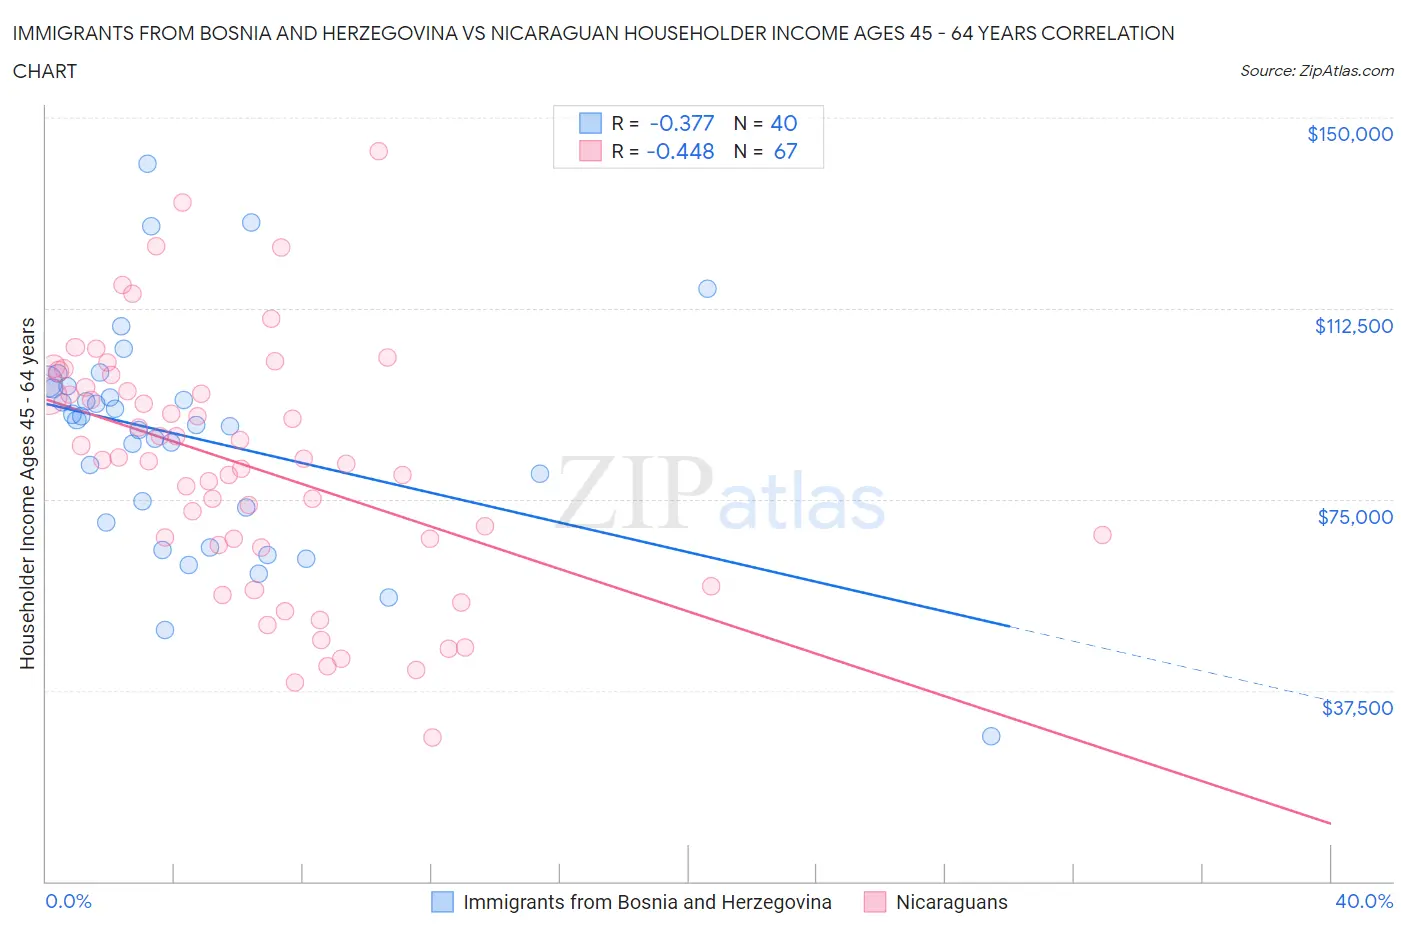 Immigrants from Bosnia and Herzegovina vs Nicaraguan Householder Income Ages 45 - 64 years